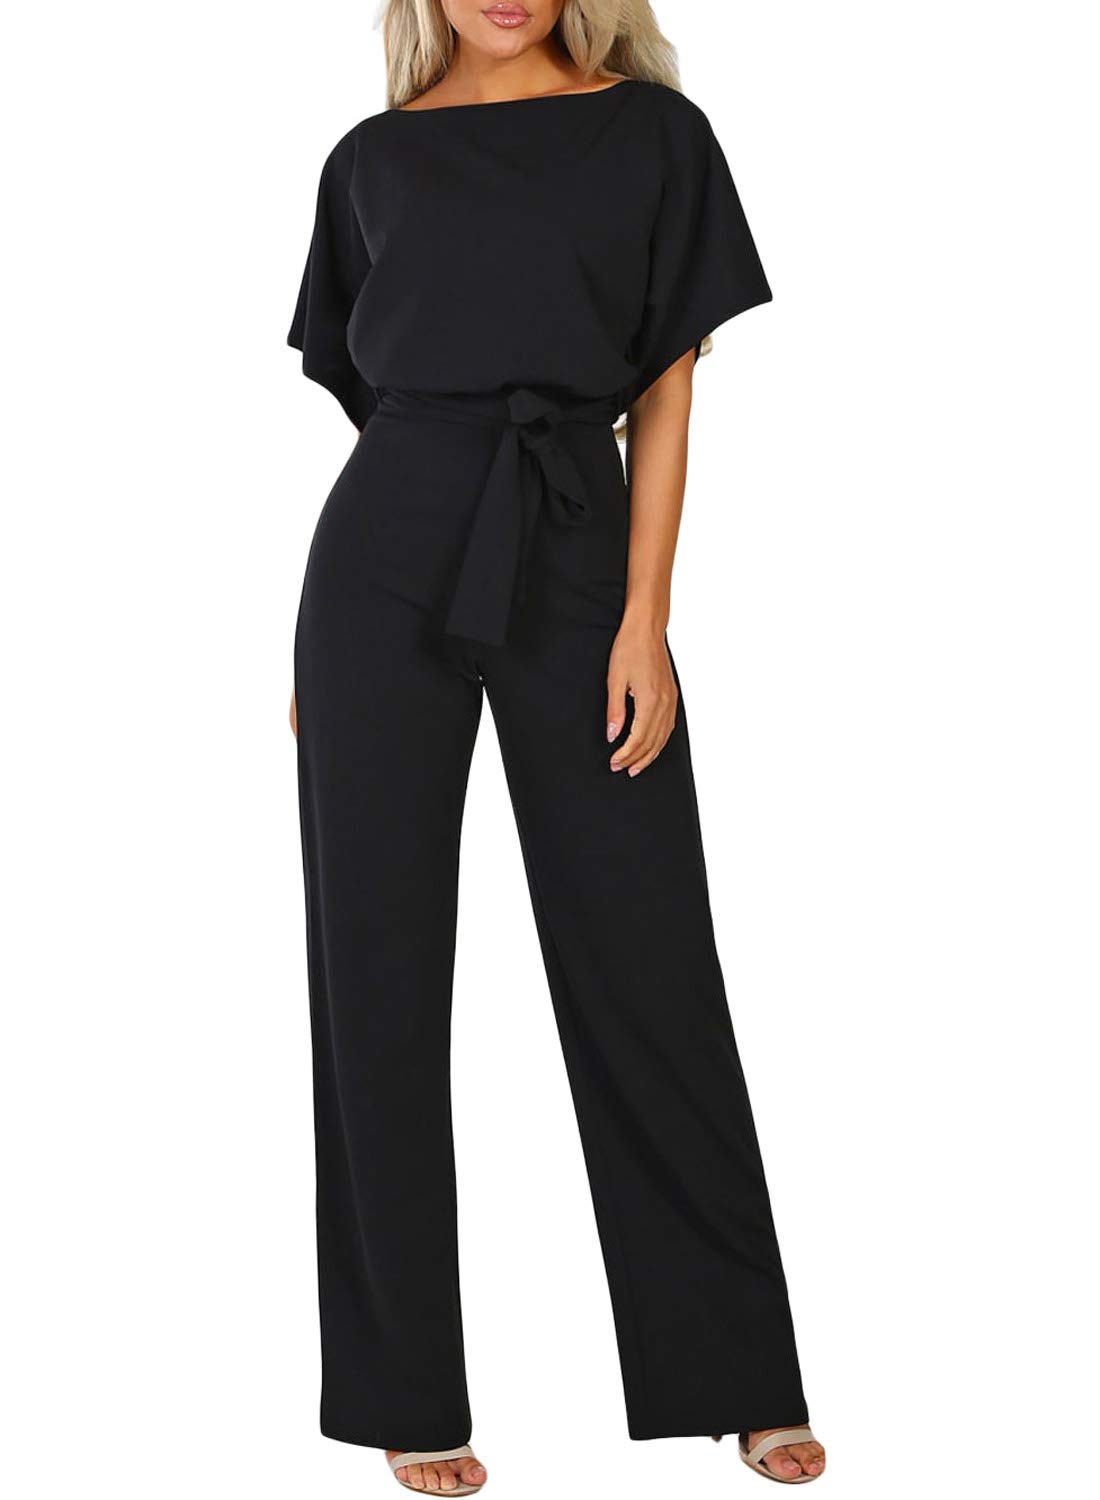 Happy Sailed Women Casual Loose Short Sleeve Belted Wide Leg Pant Romper Jumpsuits